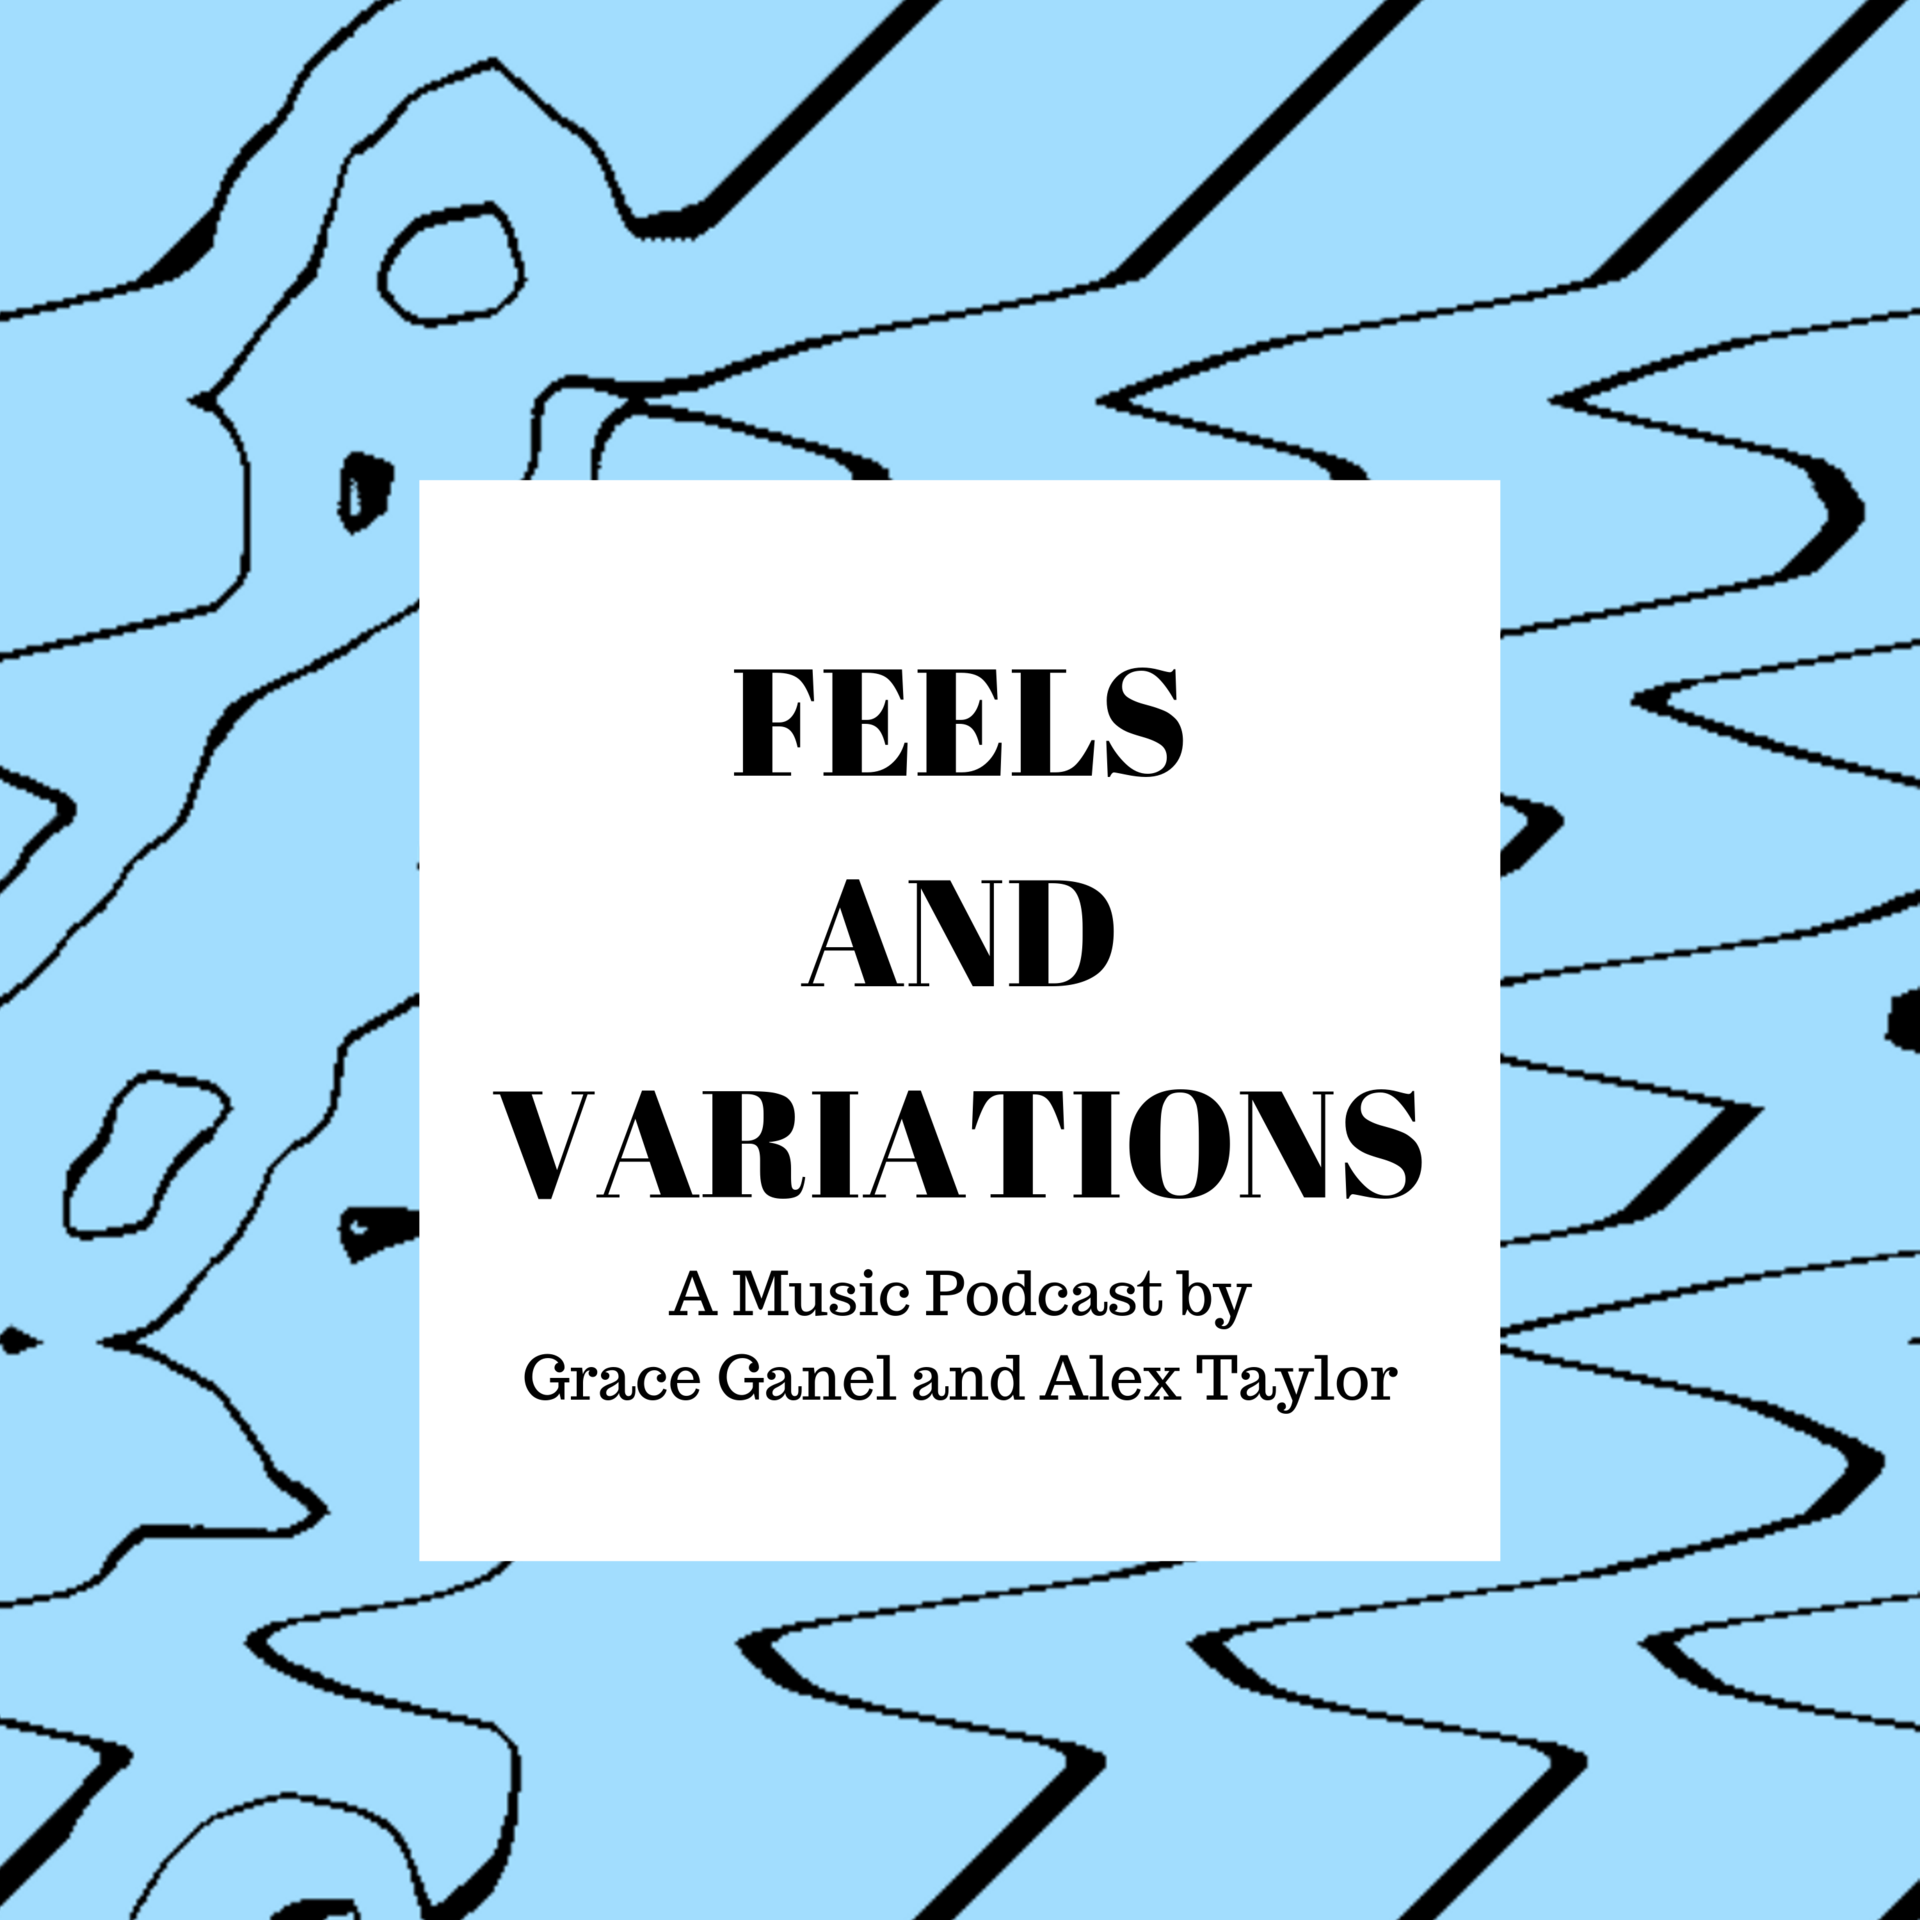 Feels and Variations podcast show image